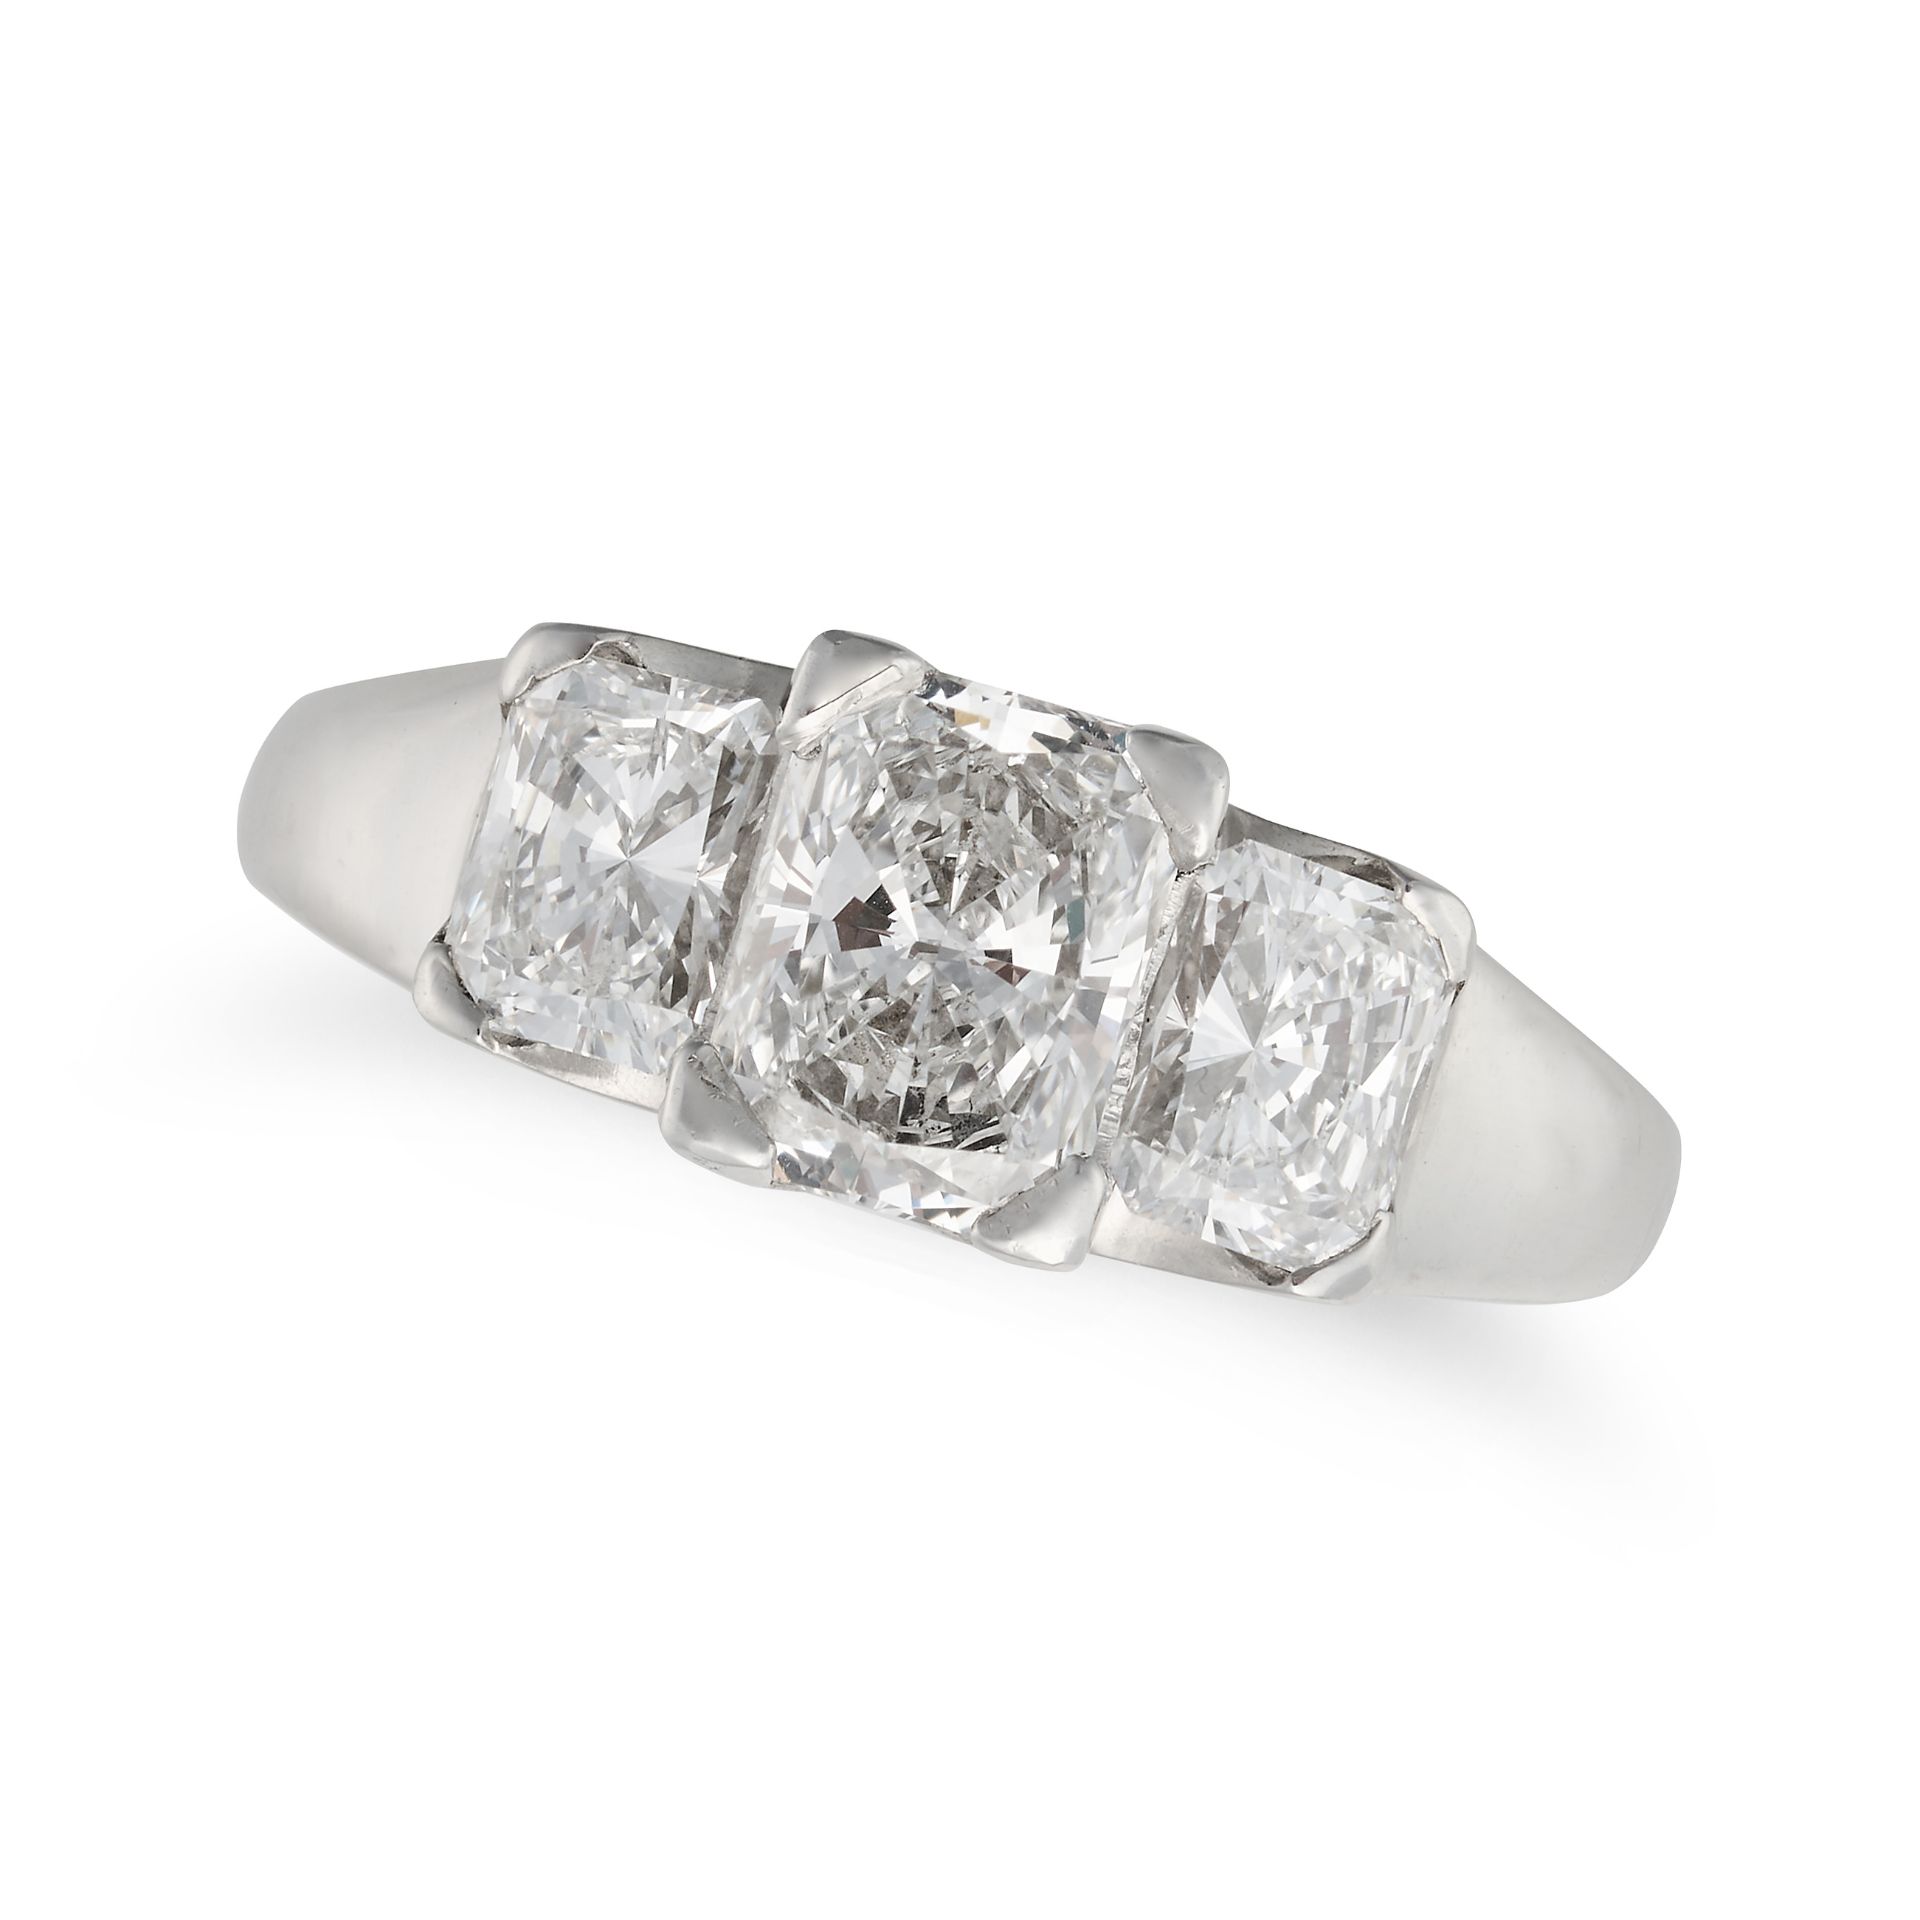 A DIAMOND THREE STONE RING in platinum, set with three radiant cut diamonds all totalling approxi...